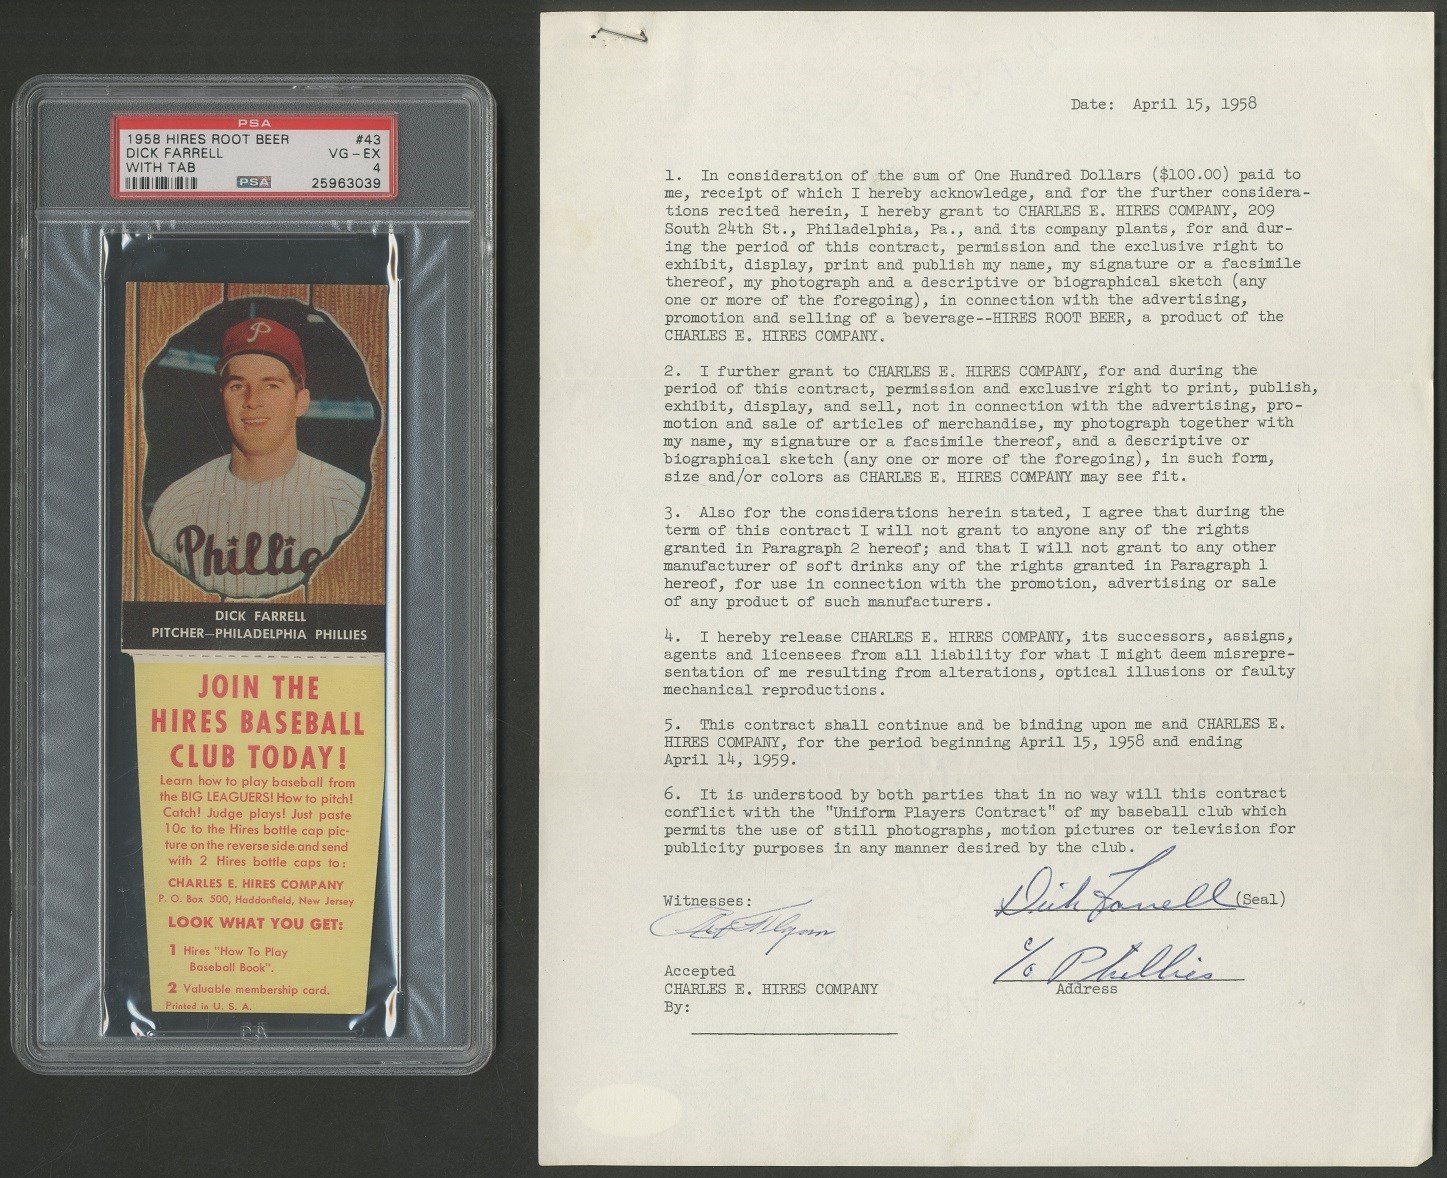 Baseball Autographs - Dick Farrell Signed Contract for 1958 Hires Root Beer and PSA 4 1958 Hires Root Beer with Tab